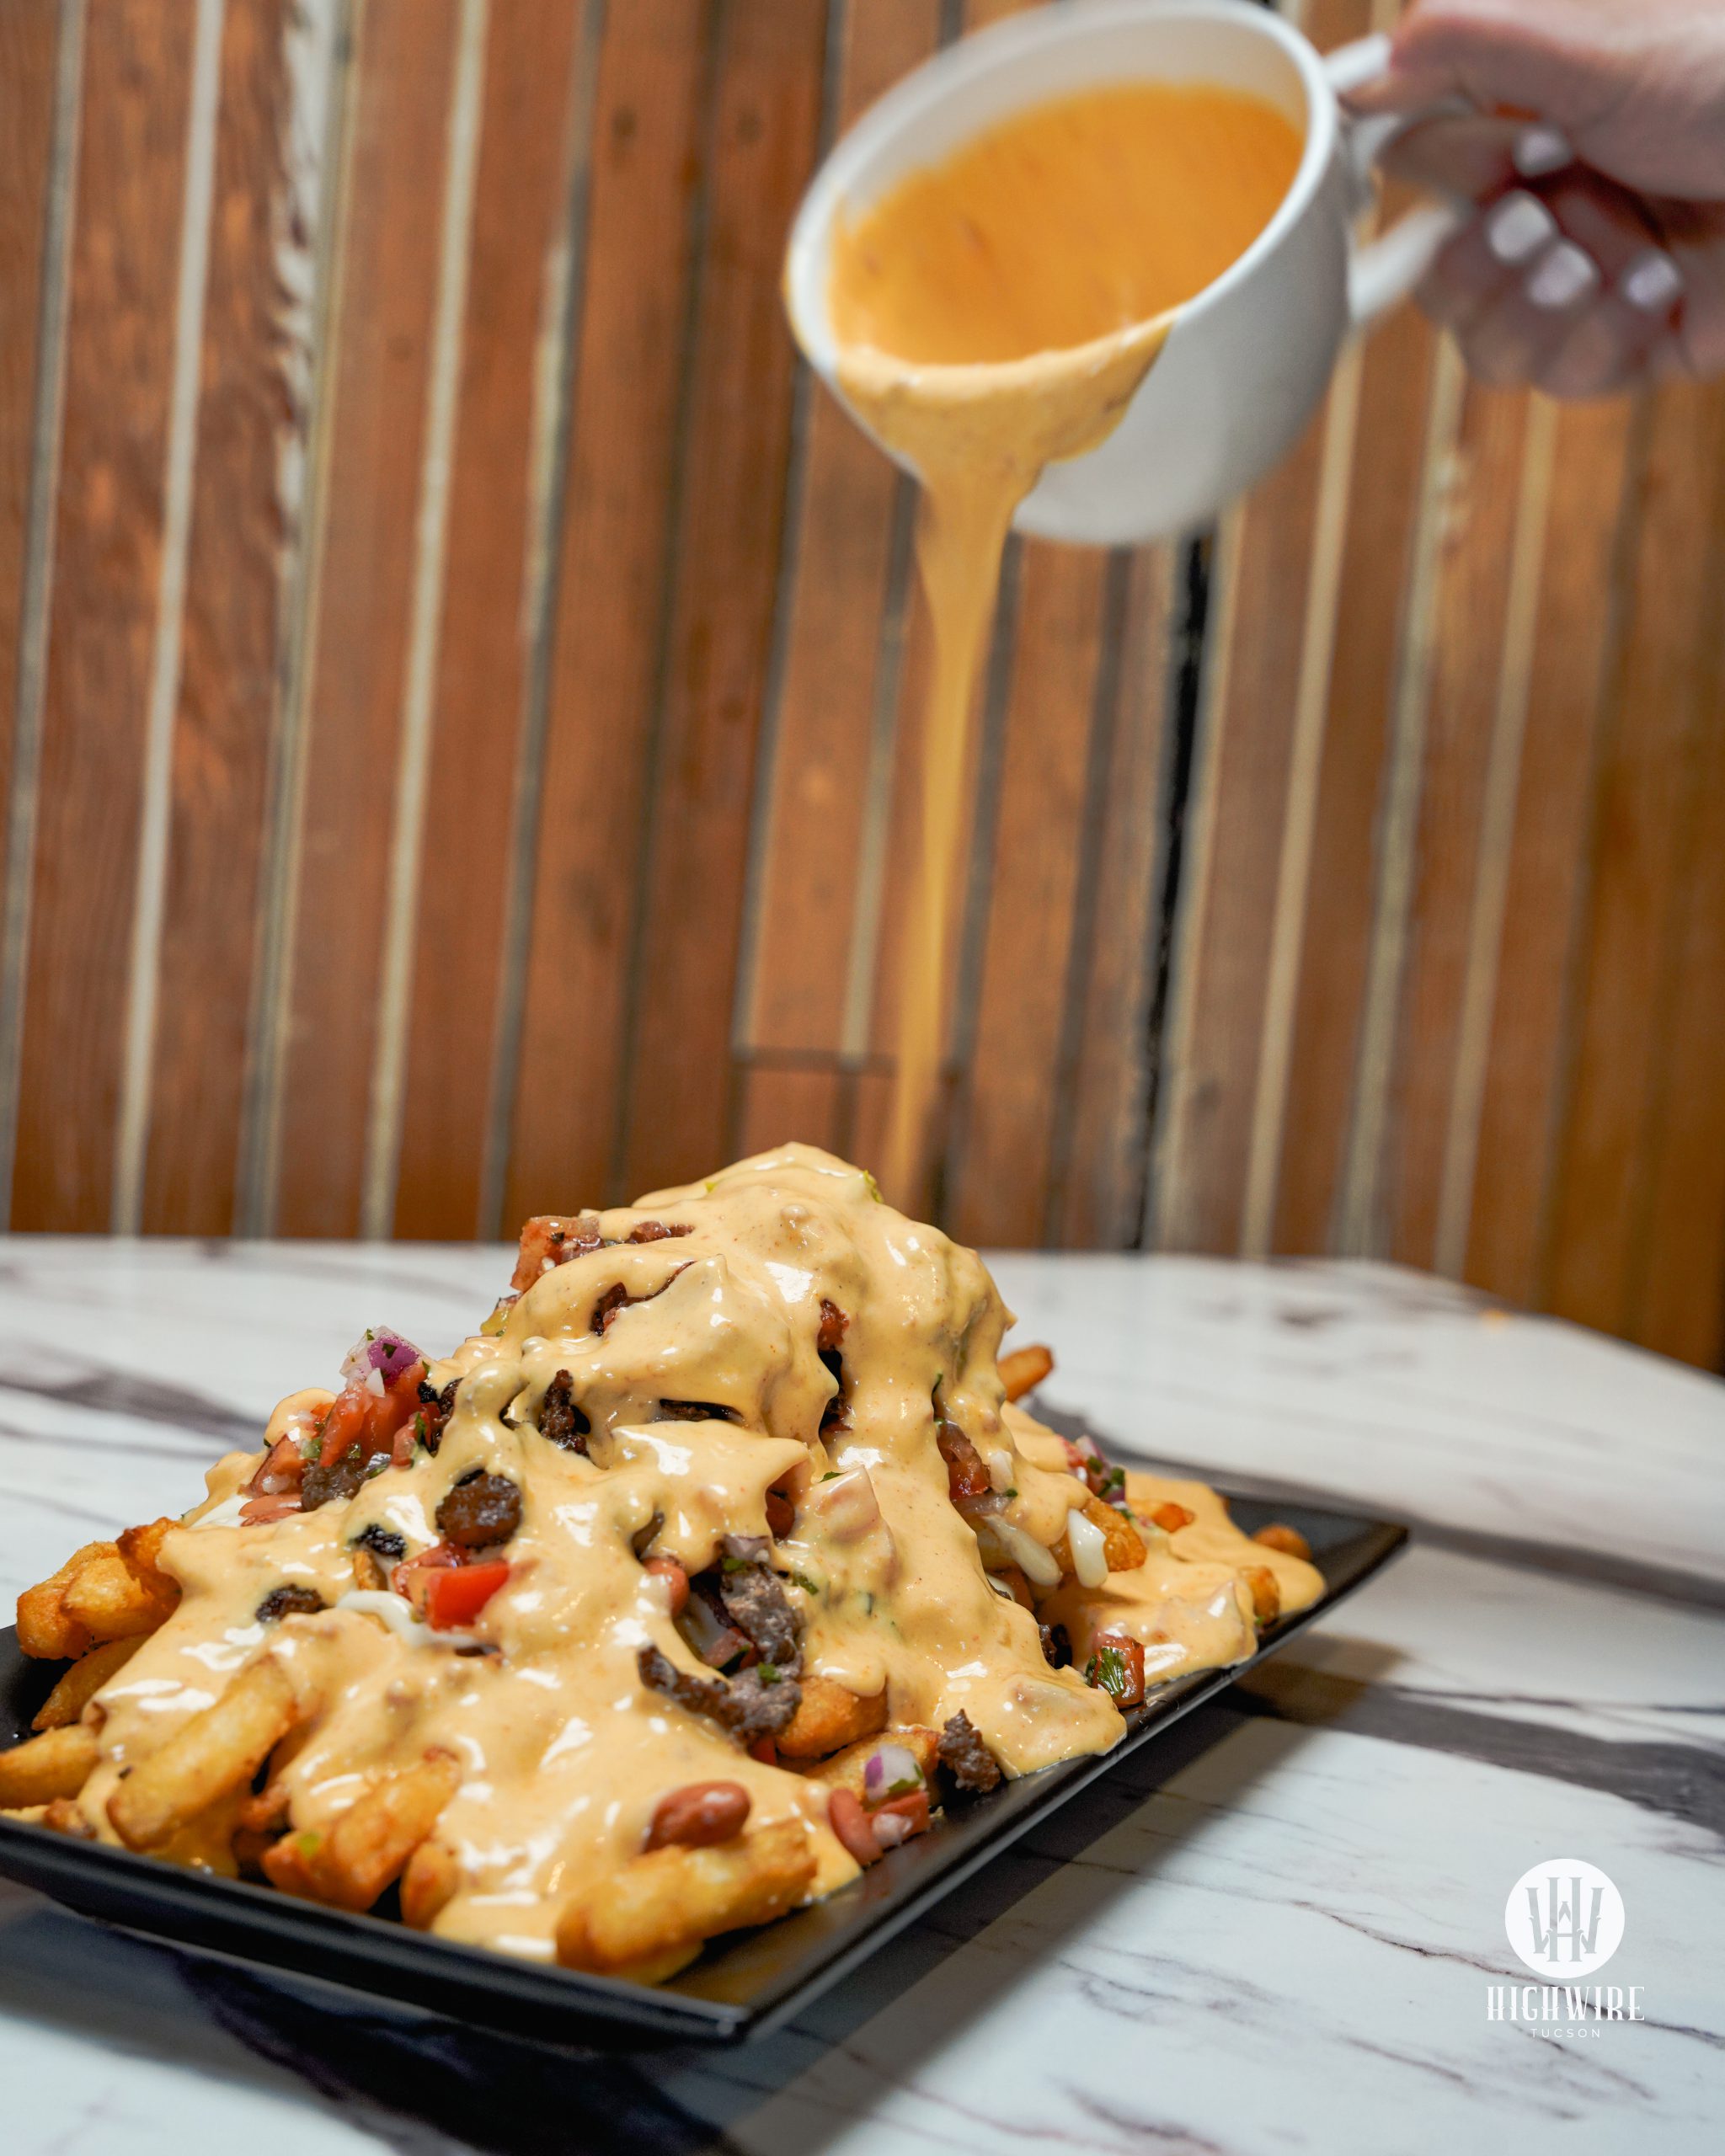 Sonoran Fries at HighWire (Photo courtesy of HighWire)